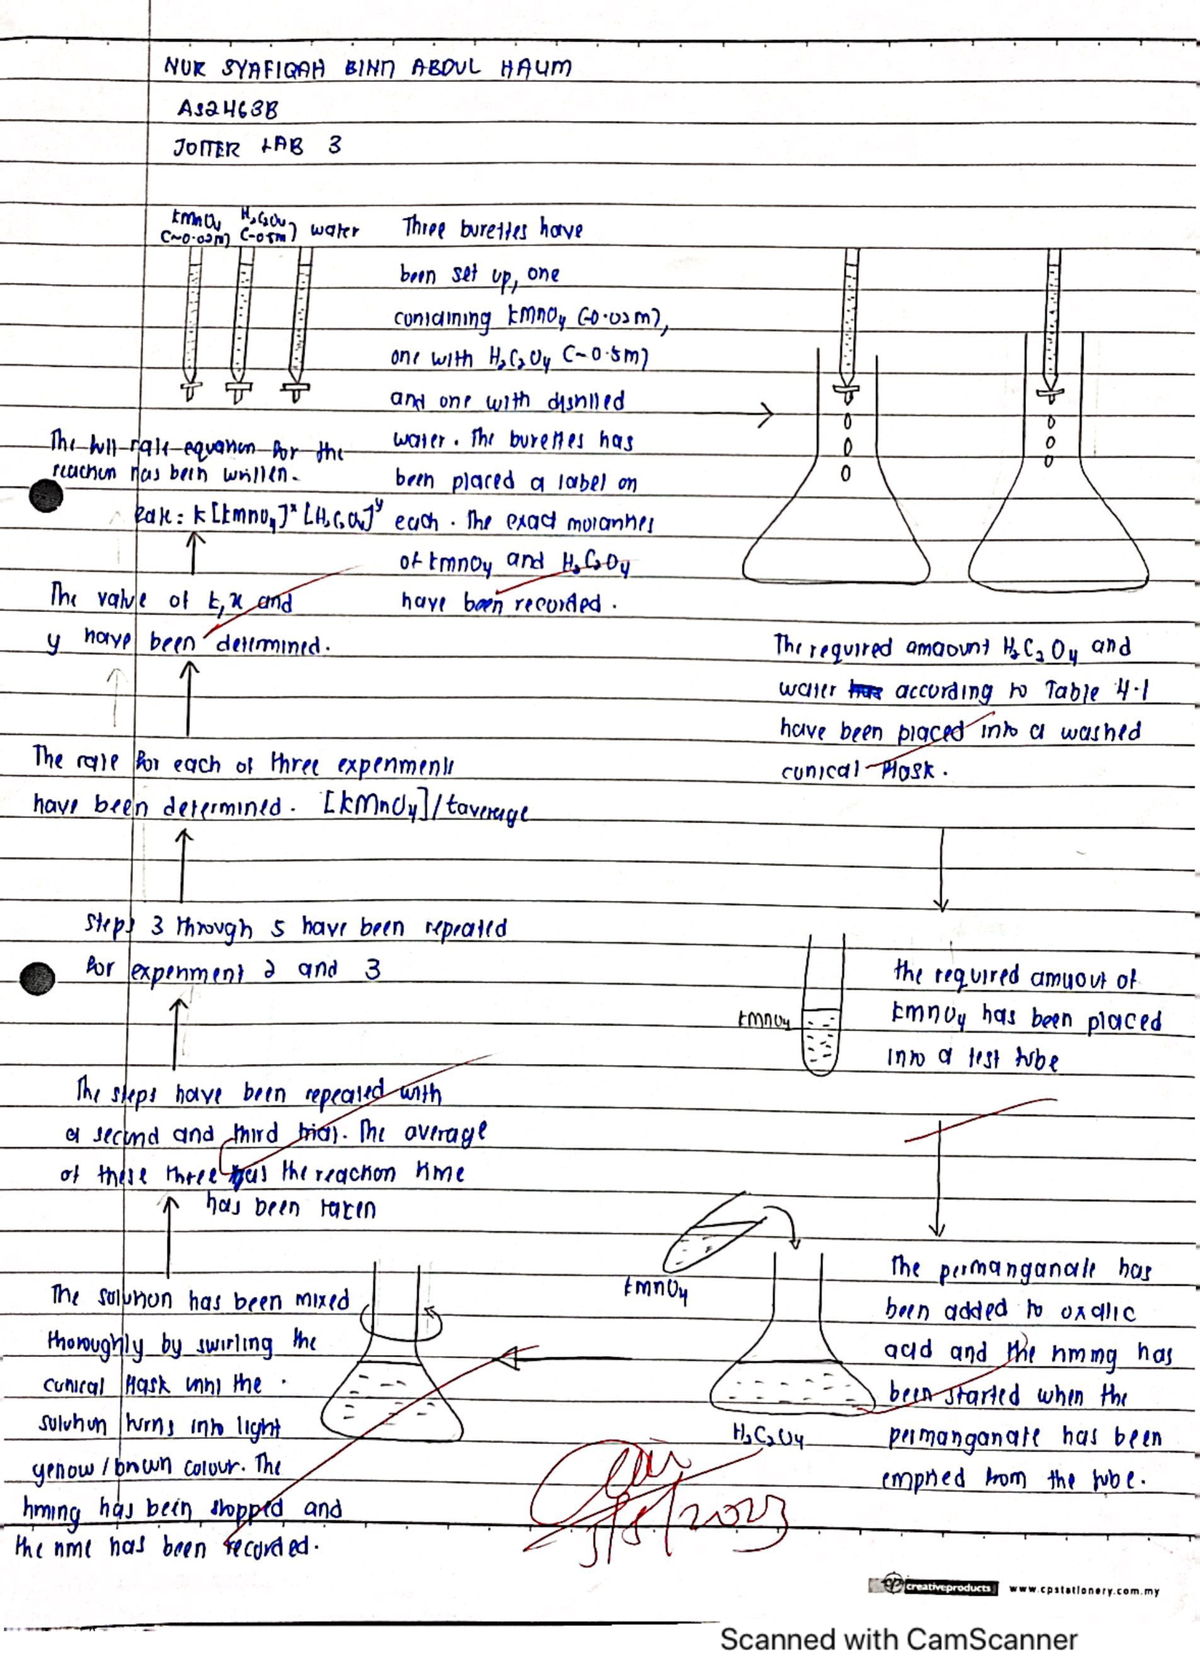 jotter book chemistry matriculation experiment 3